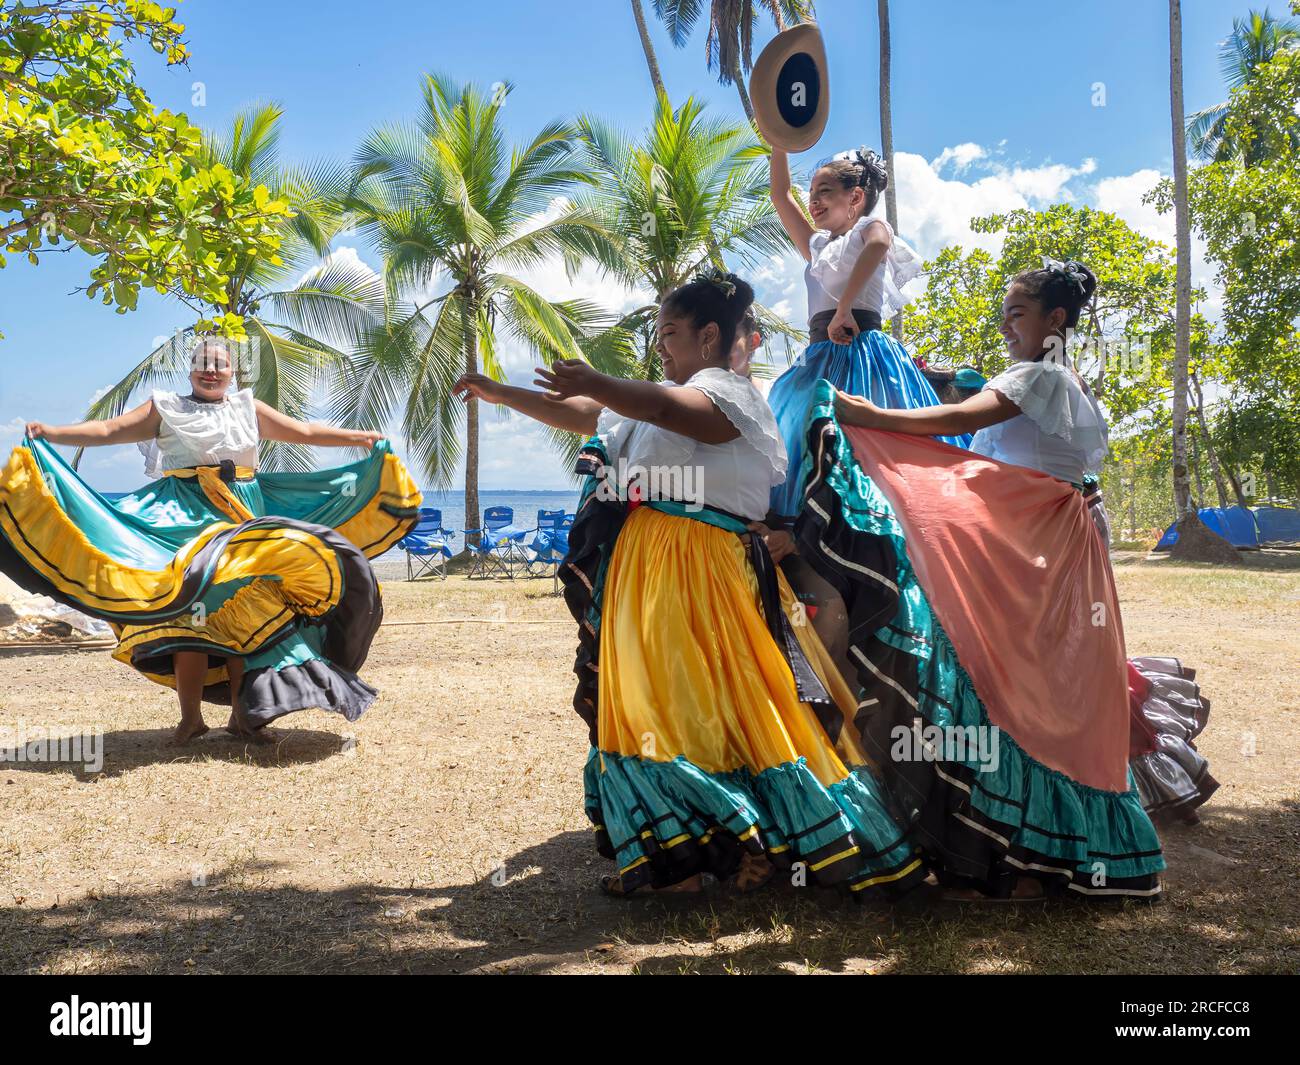 A group of young Costa Rican dancers in traditional dress perform at Playa Blanca, El Golfito, Costa Rica. Stock Photo